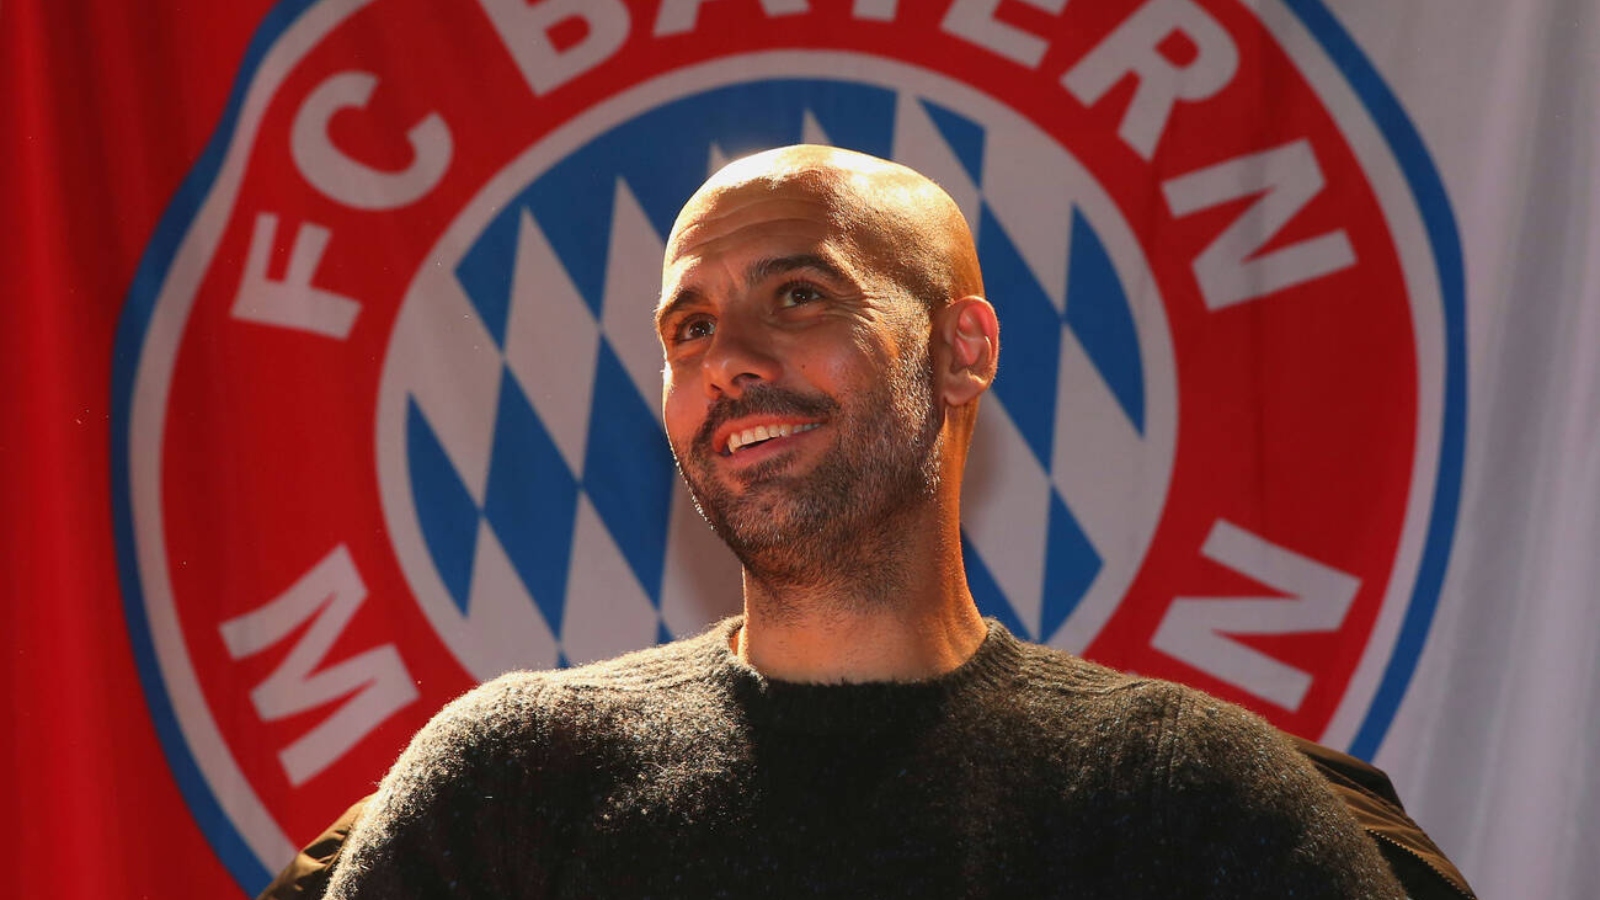 where are they now? bayern munich’s most expensive signing of every season since 2010